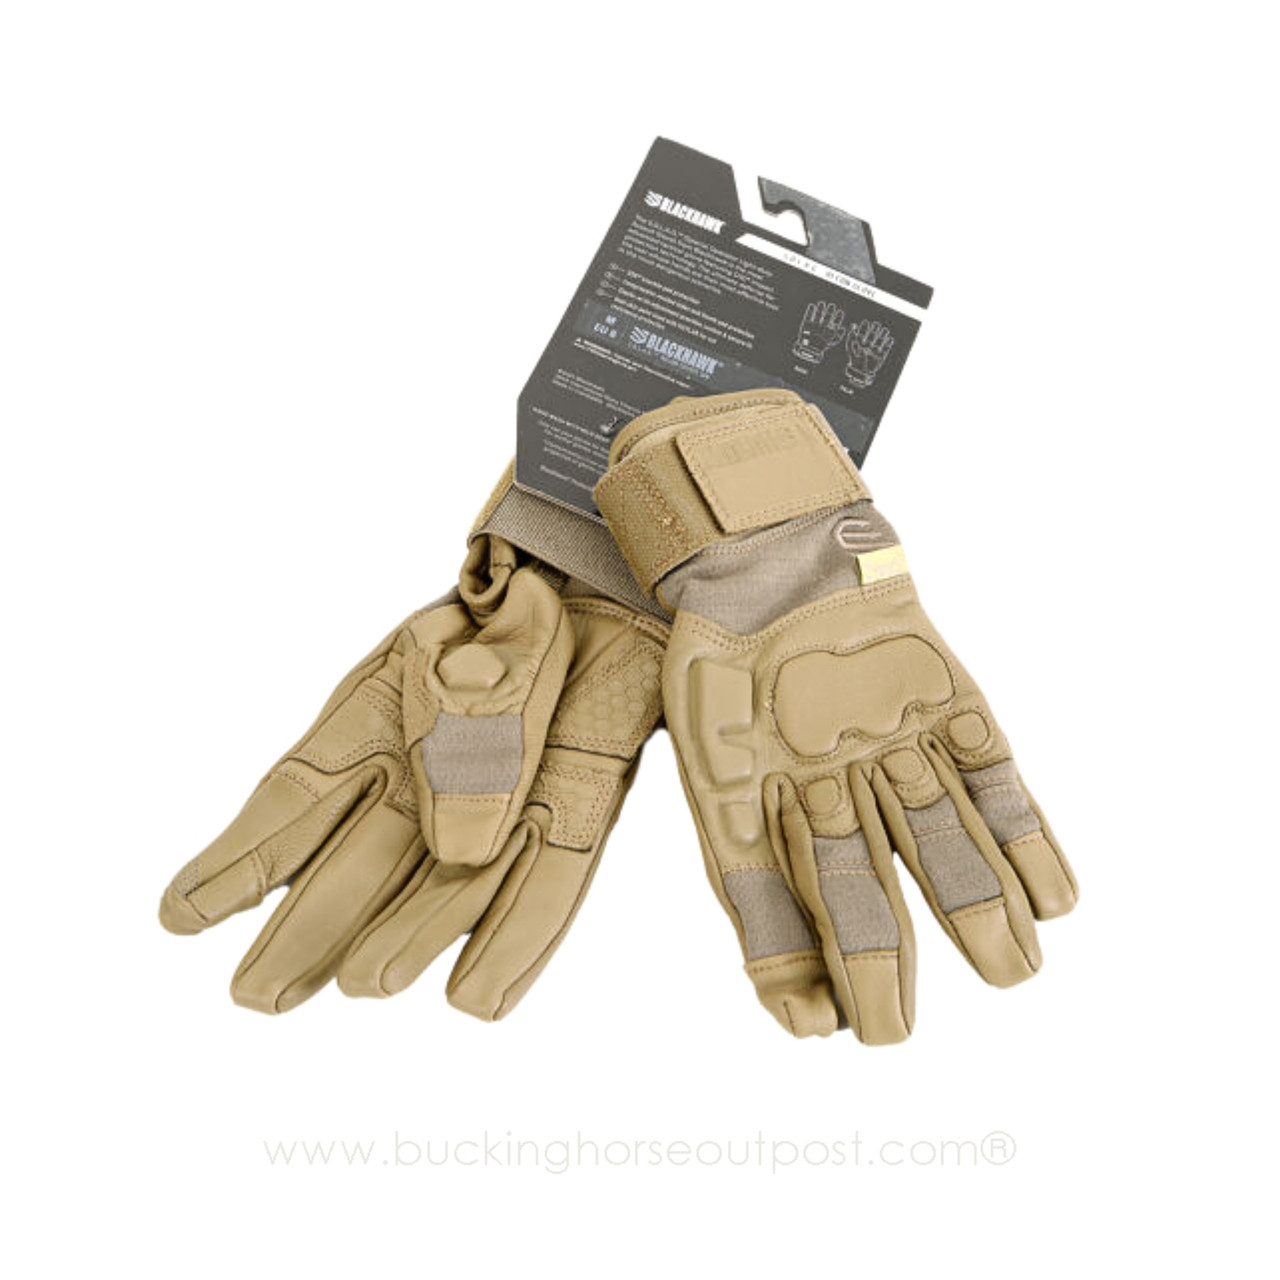 Recon Gloves, size Small (Special Operations Light-duty Assault Glove)